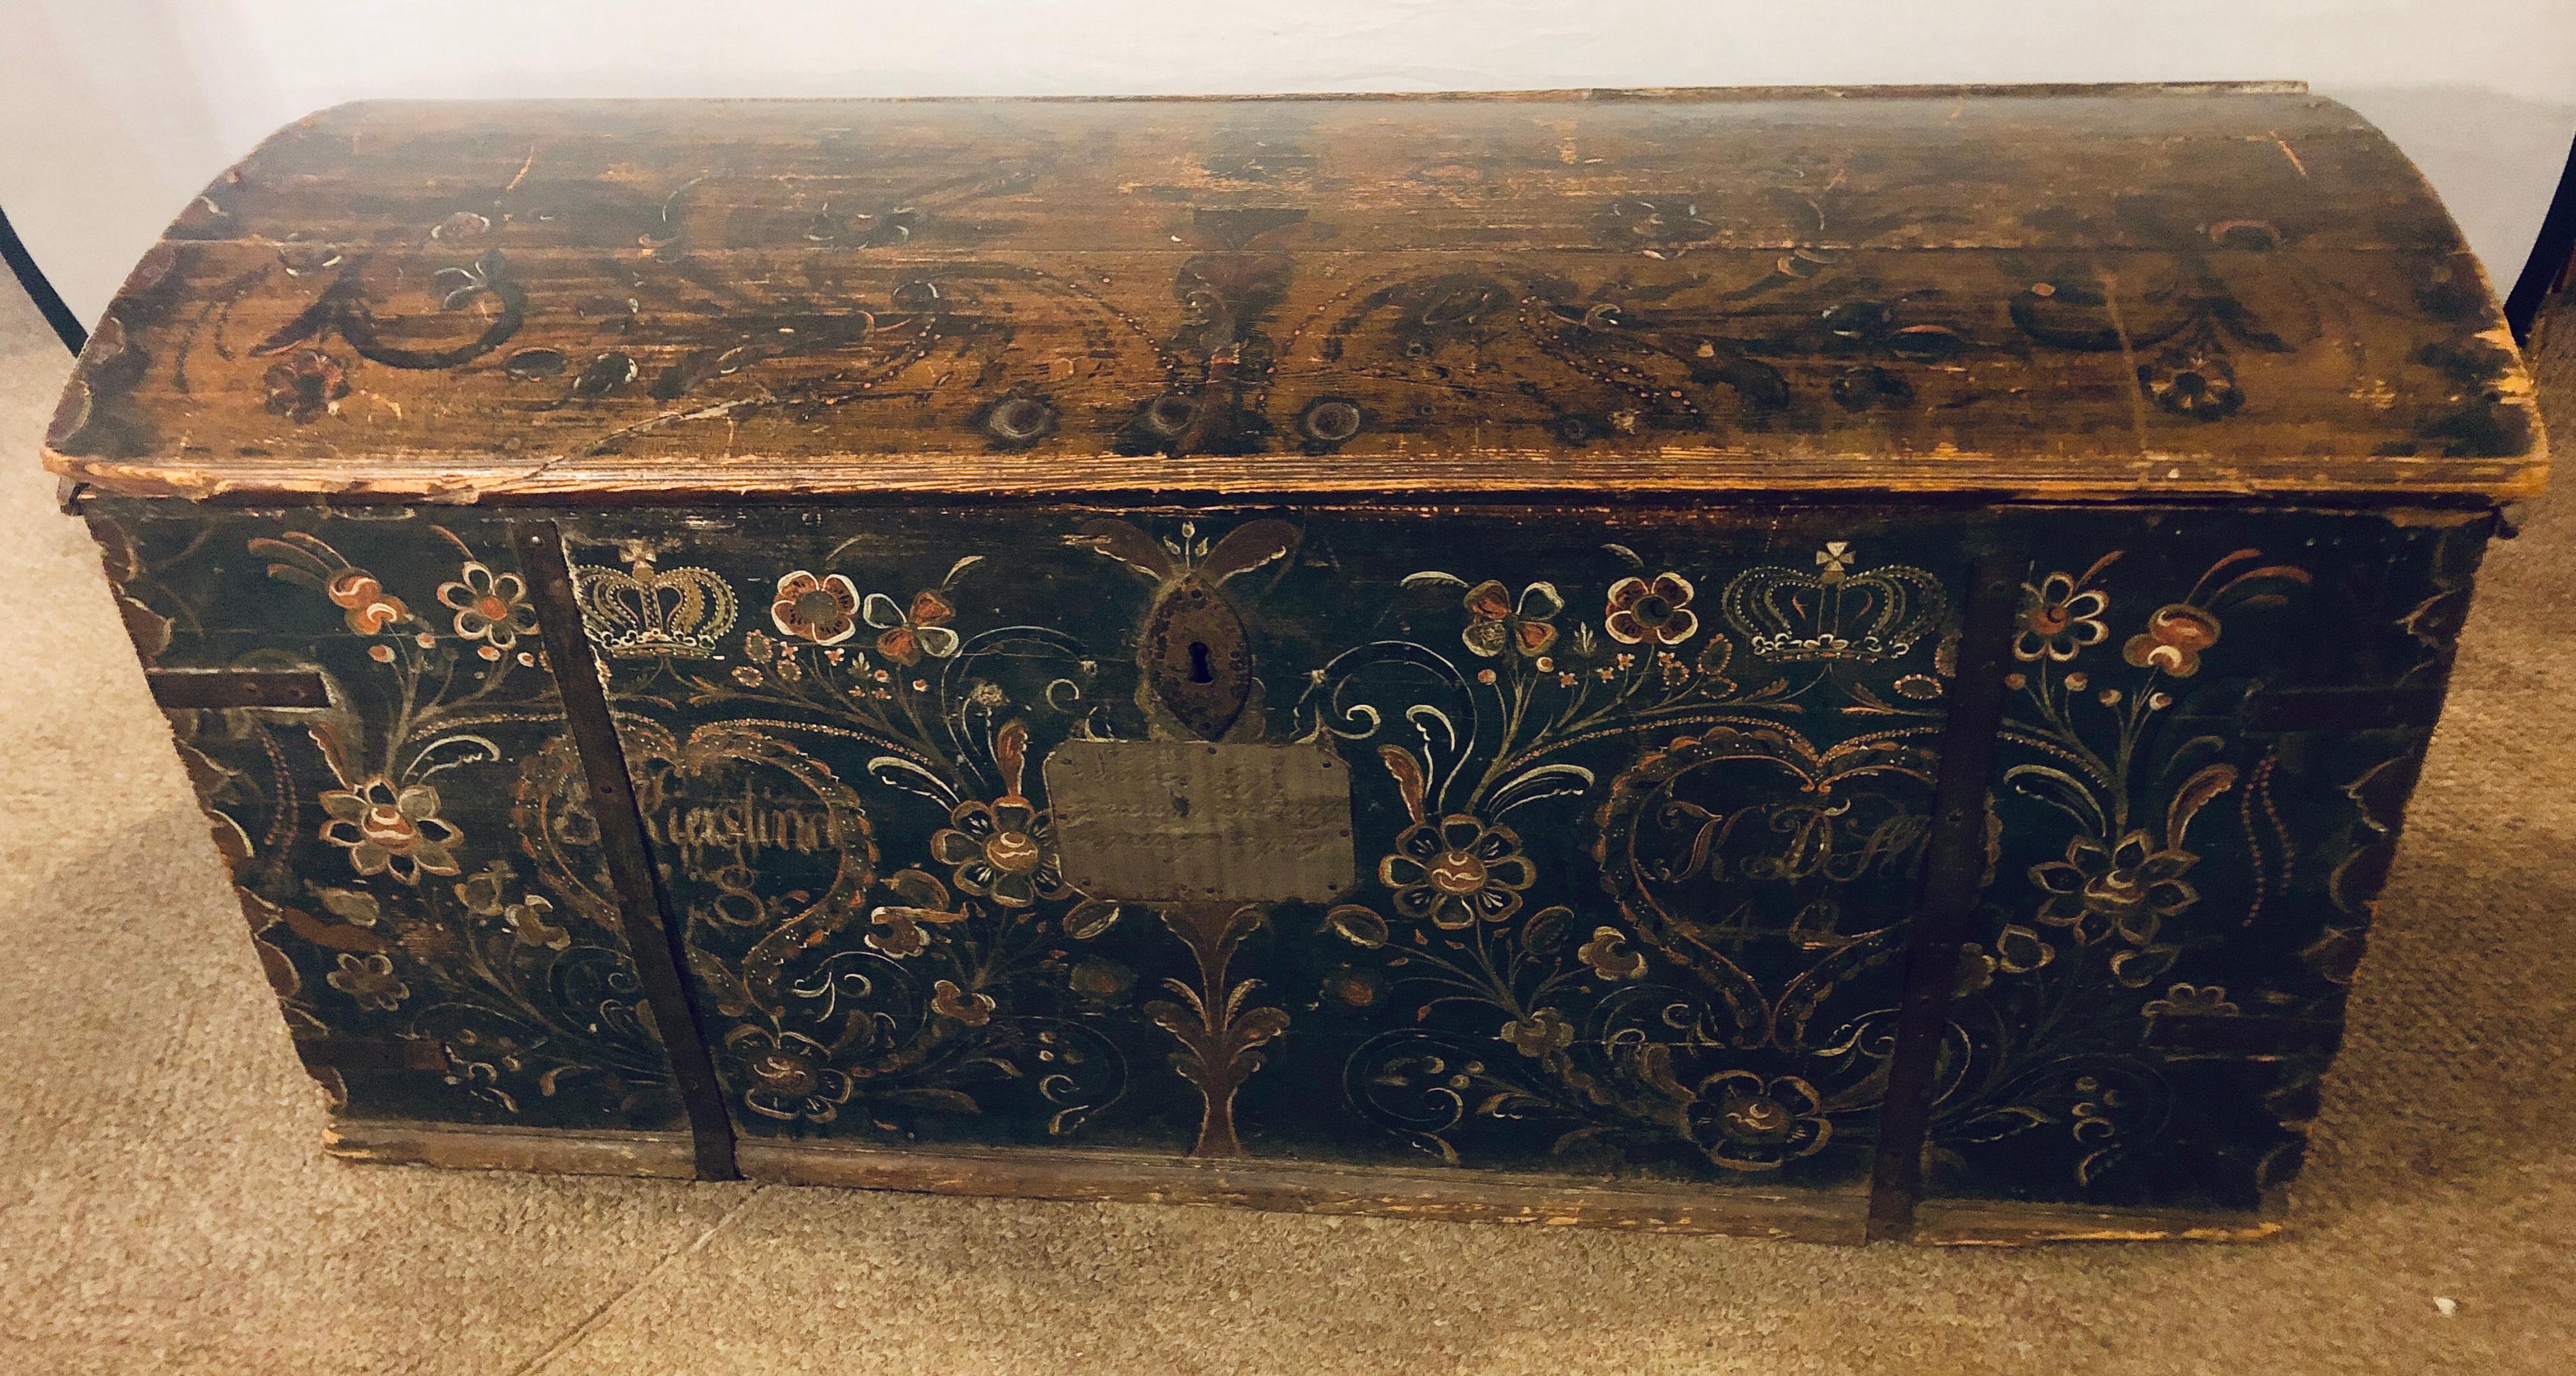 A dated, signed, inscribed 1840 incredibly detailed original painted dowry chest or trunk with original lock and key. This large and impressive chest even bears the original metal engraved presentation given to the groom. Bearing the kings crest in